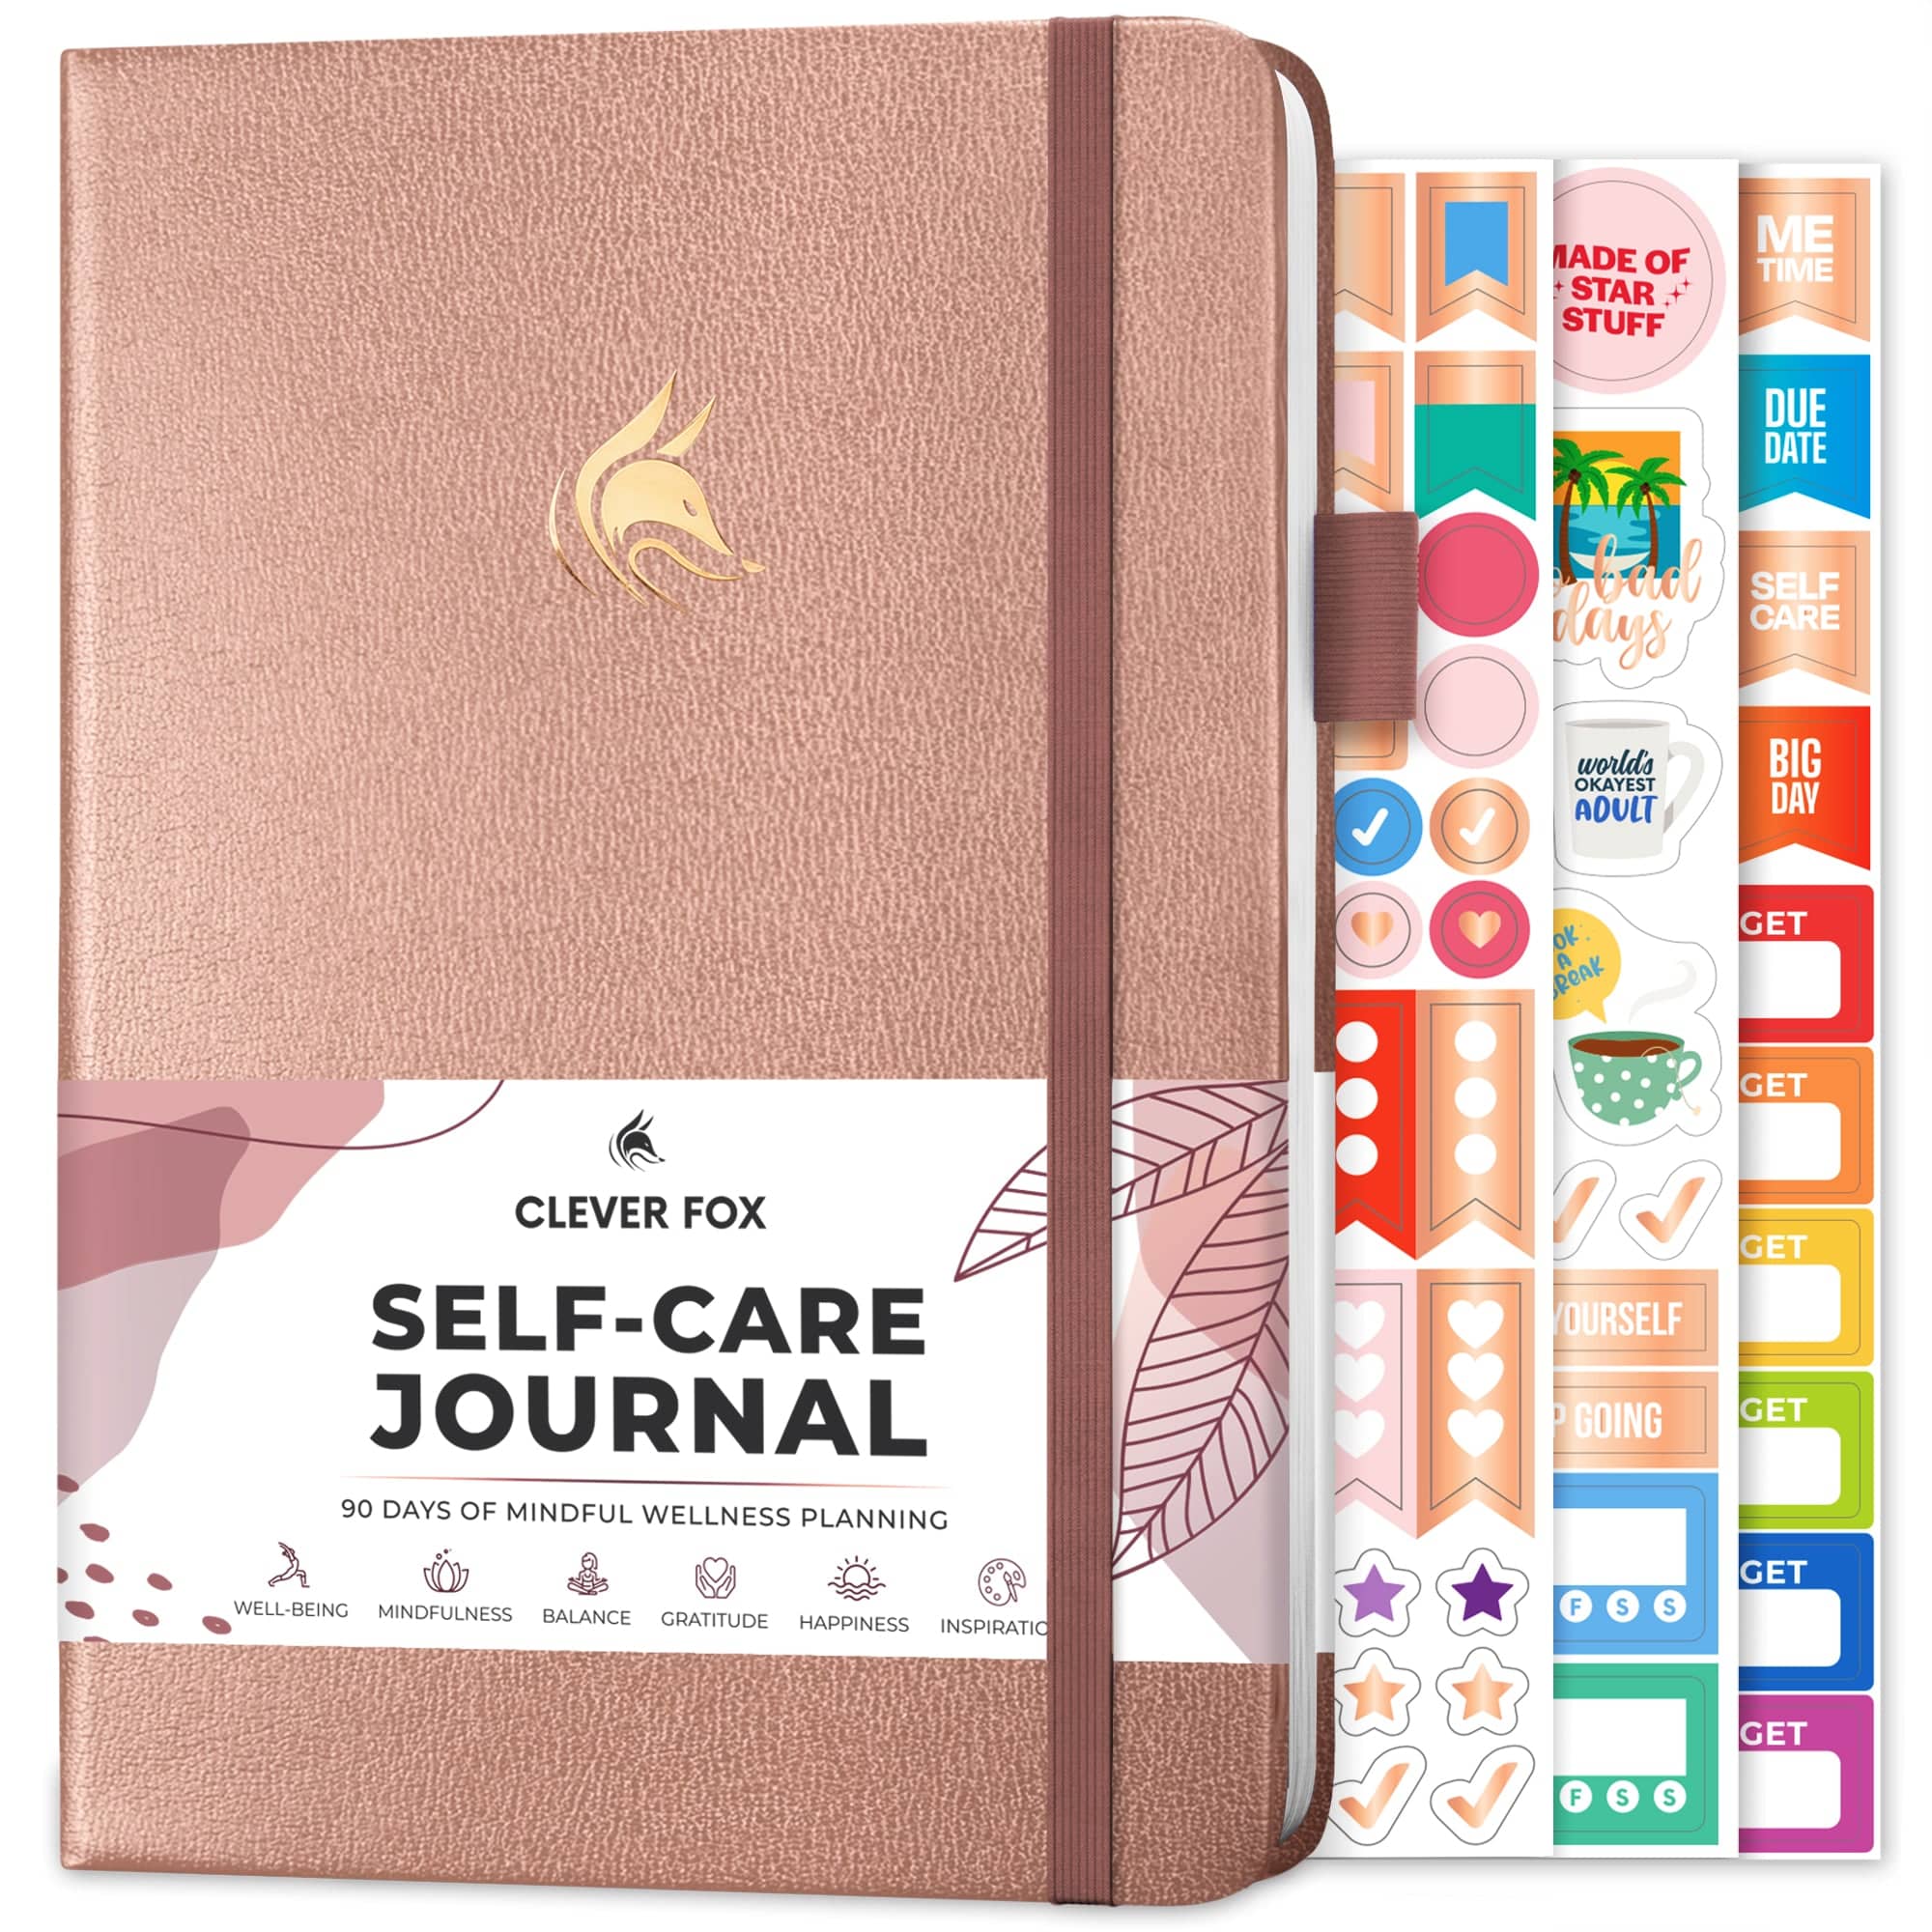 Clever Fox Self-Care Journal - image 1 of 7